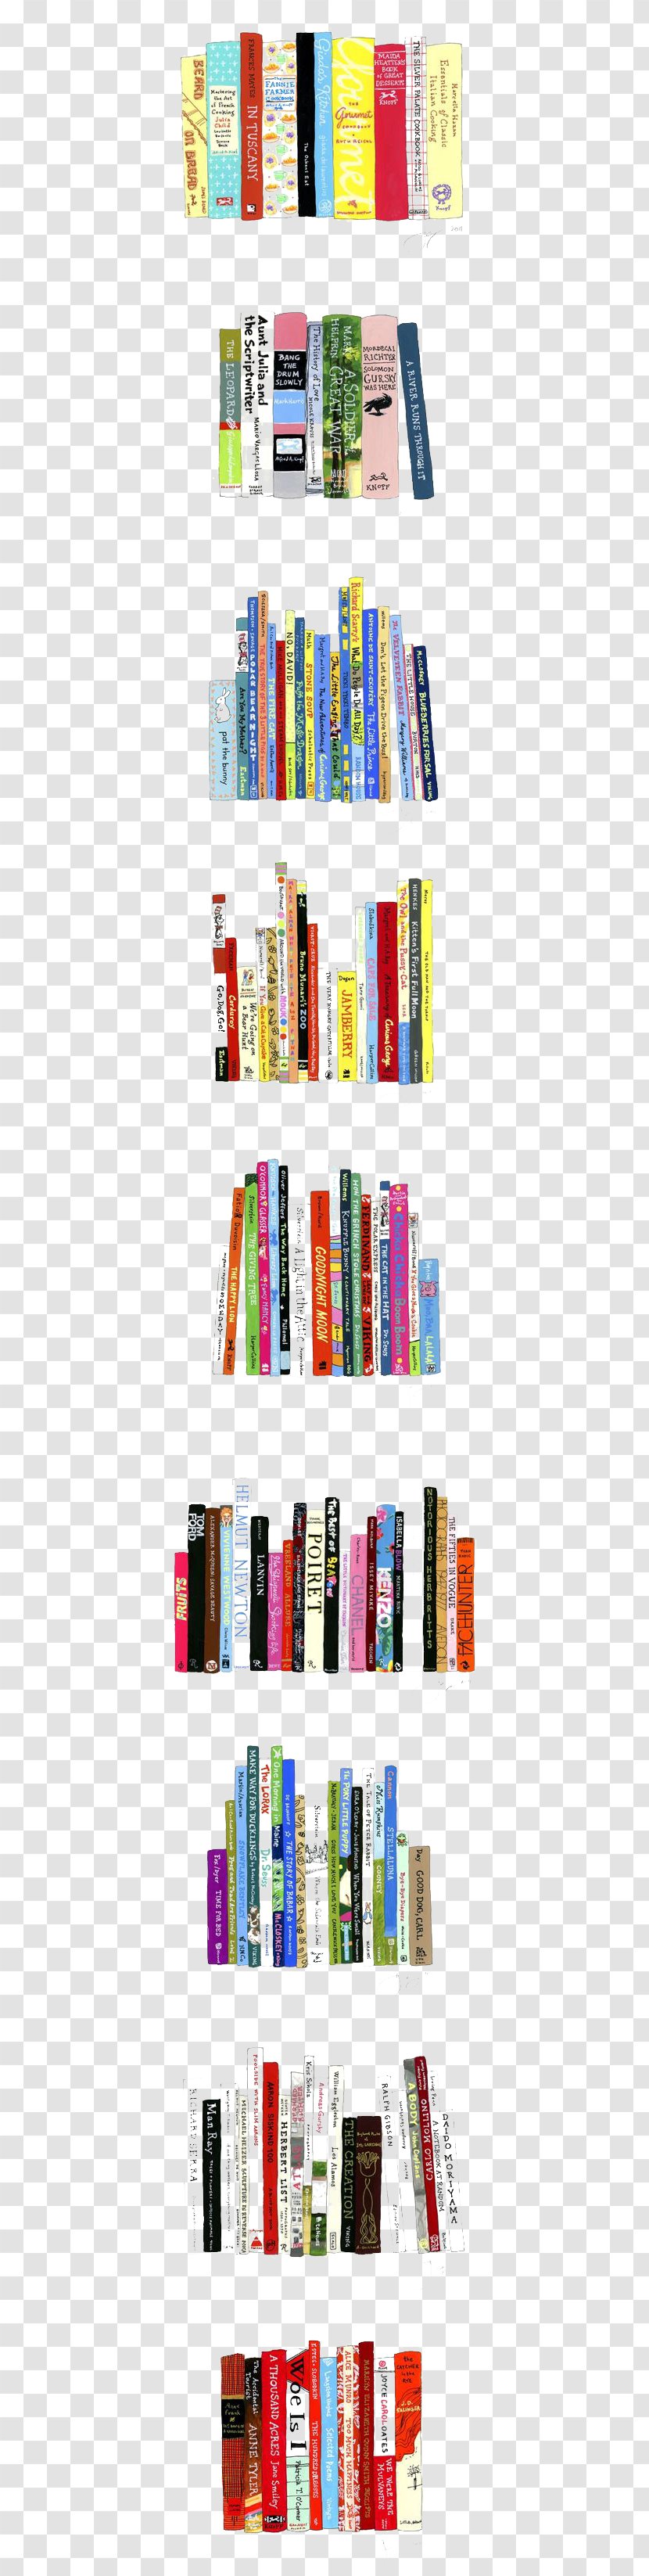 Bookcase Drawing - Book Transparent PNG